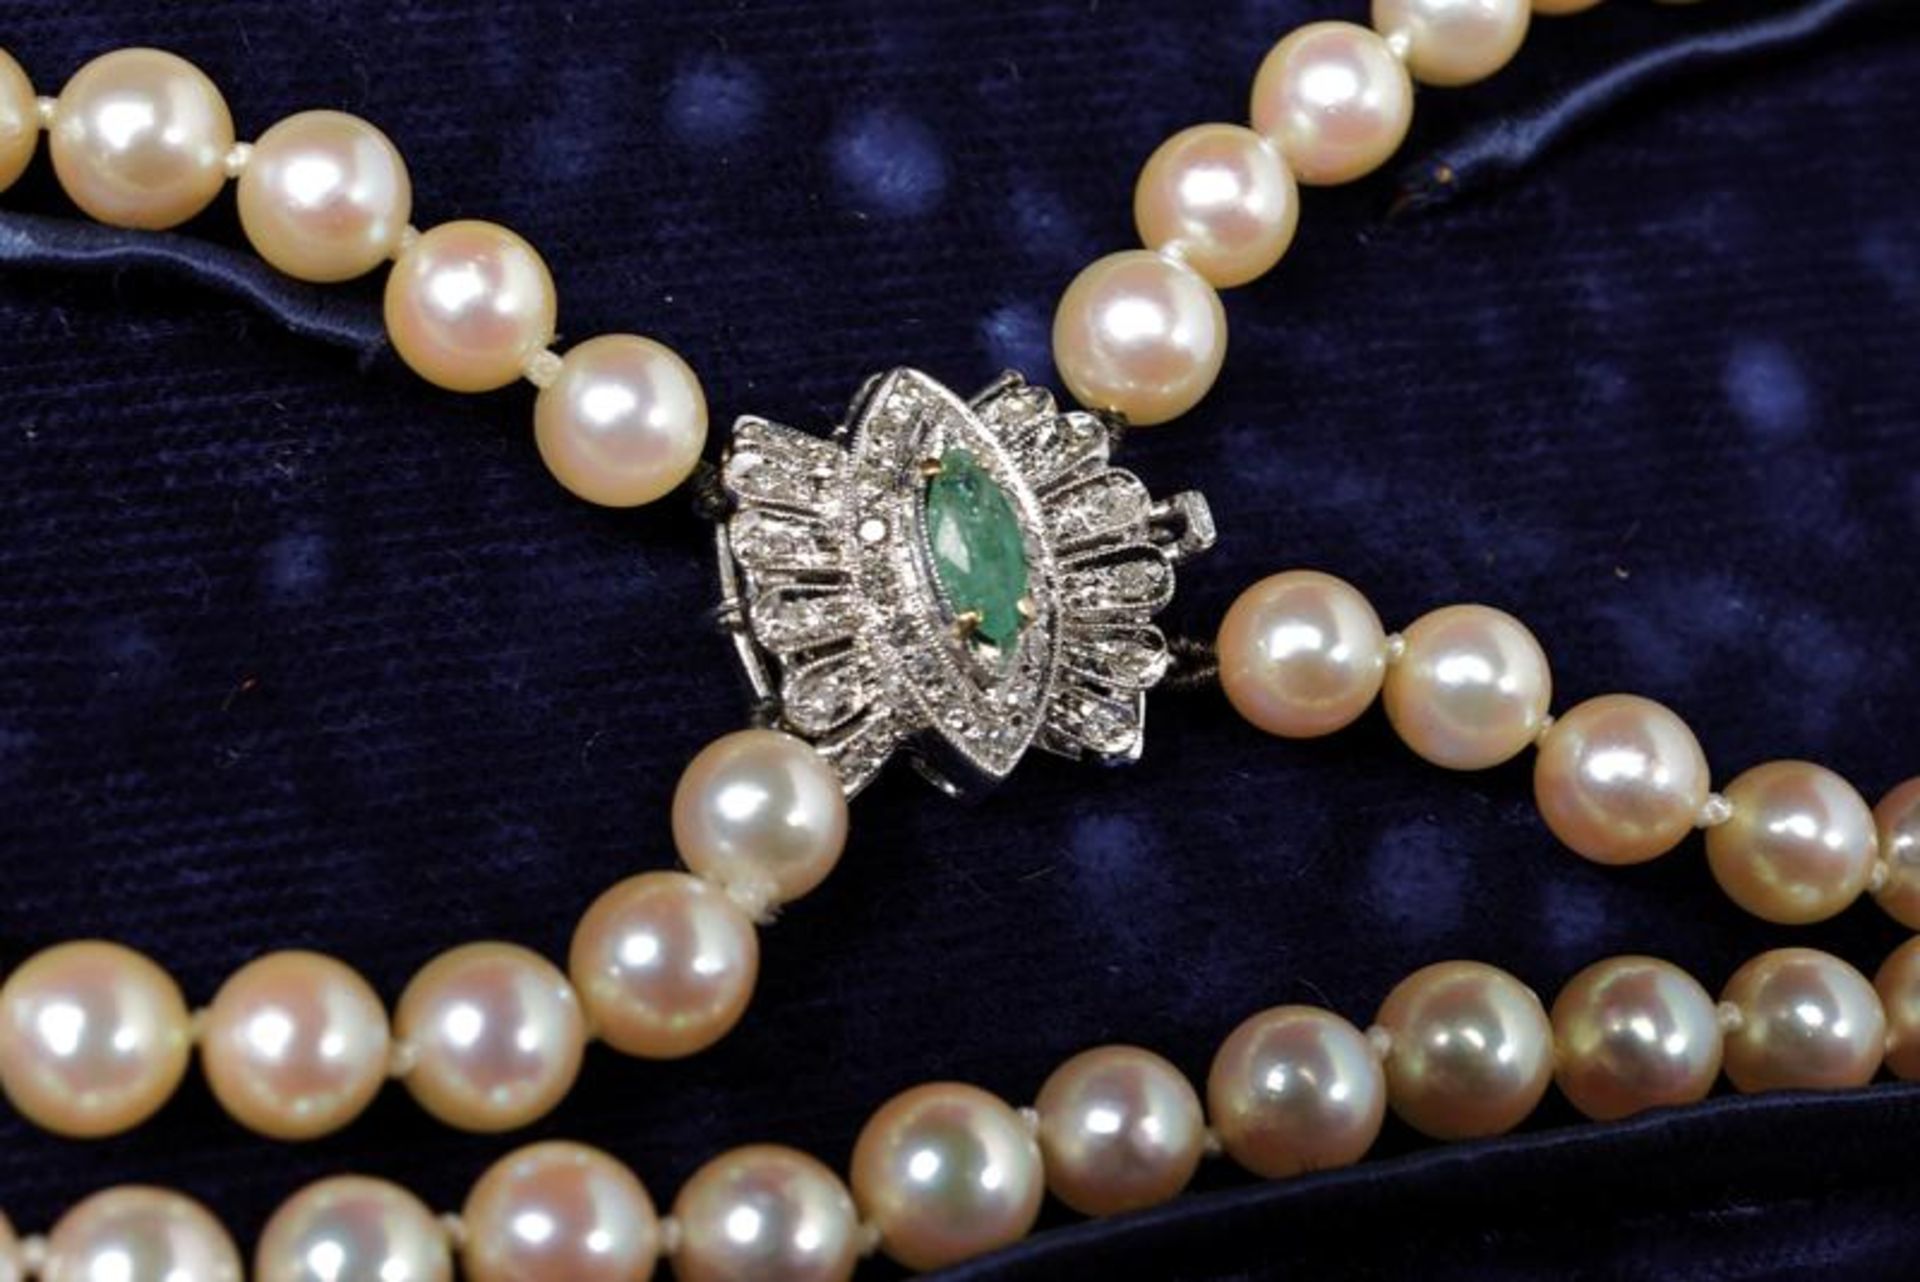 Double strand 6 mm cultured pearl necklace with emerald and diamond set clasp - Image 2 of 3